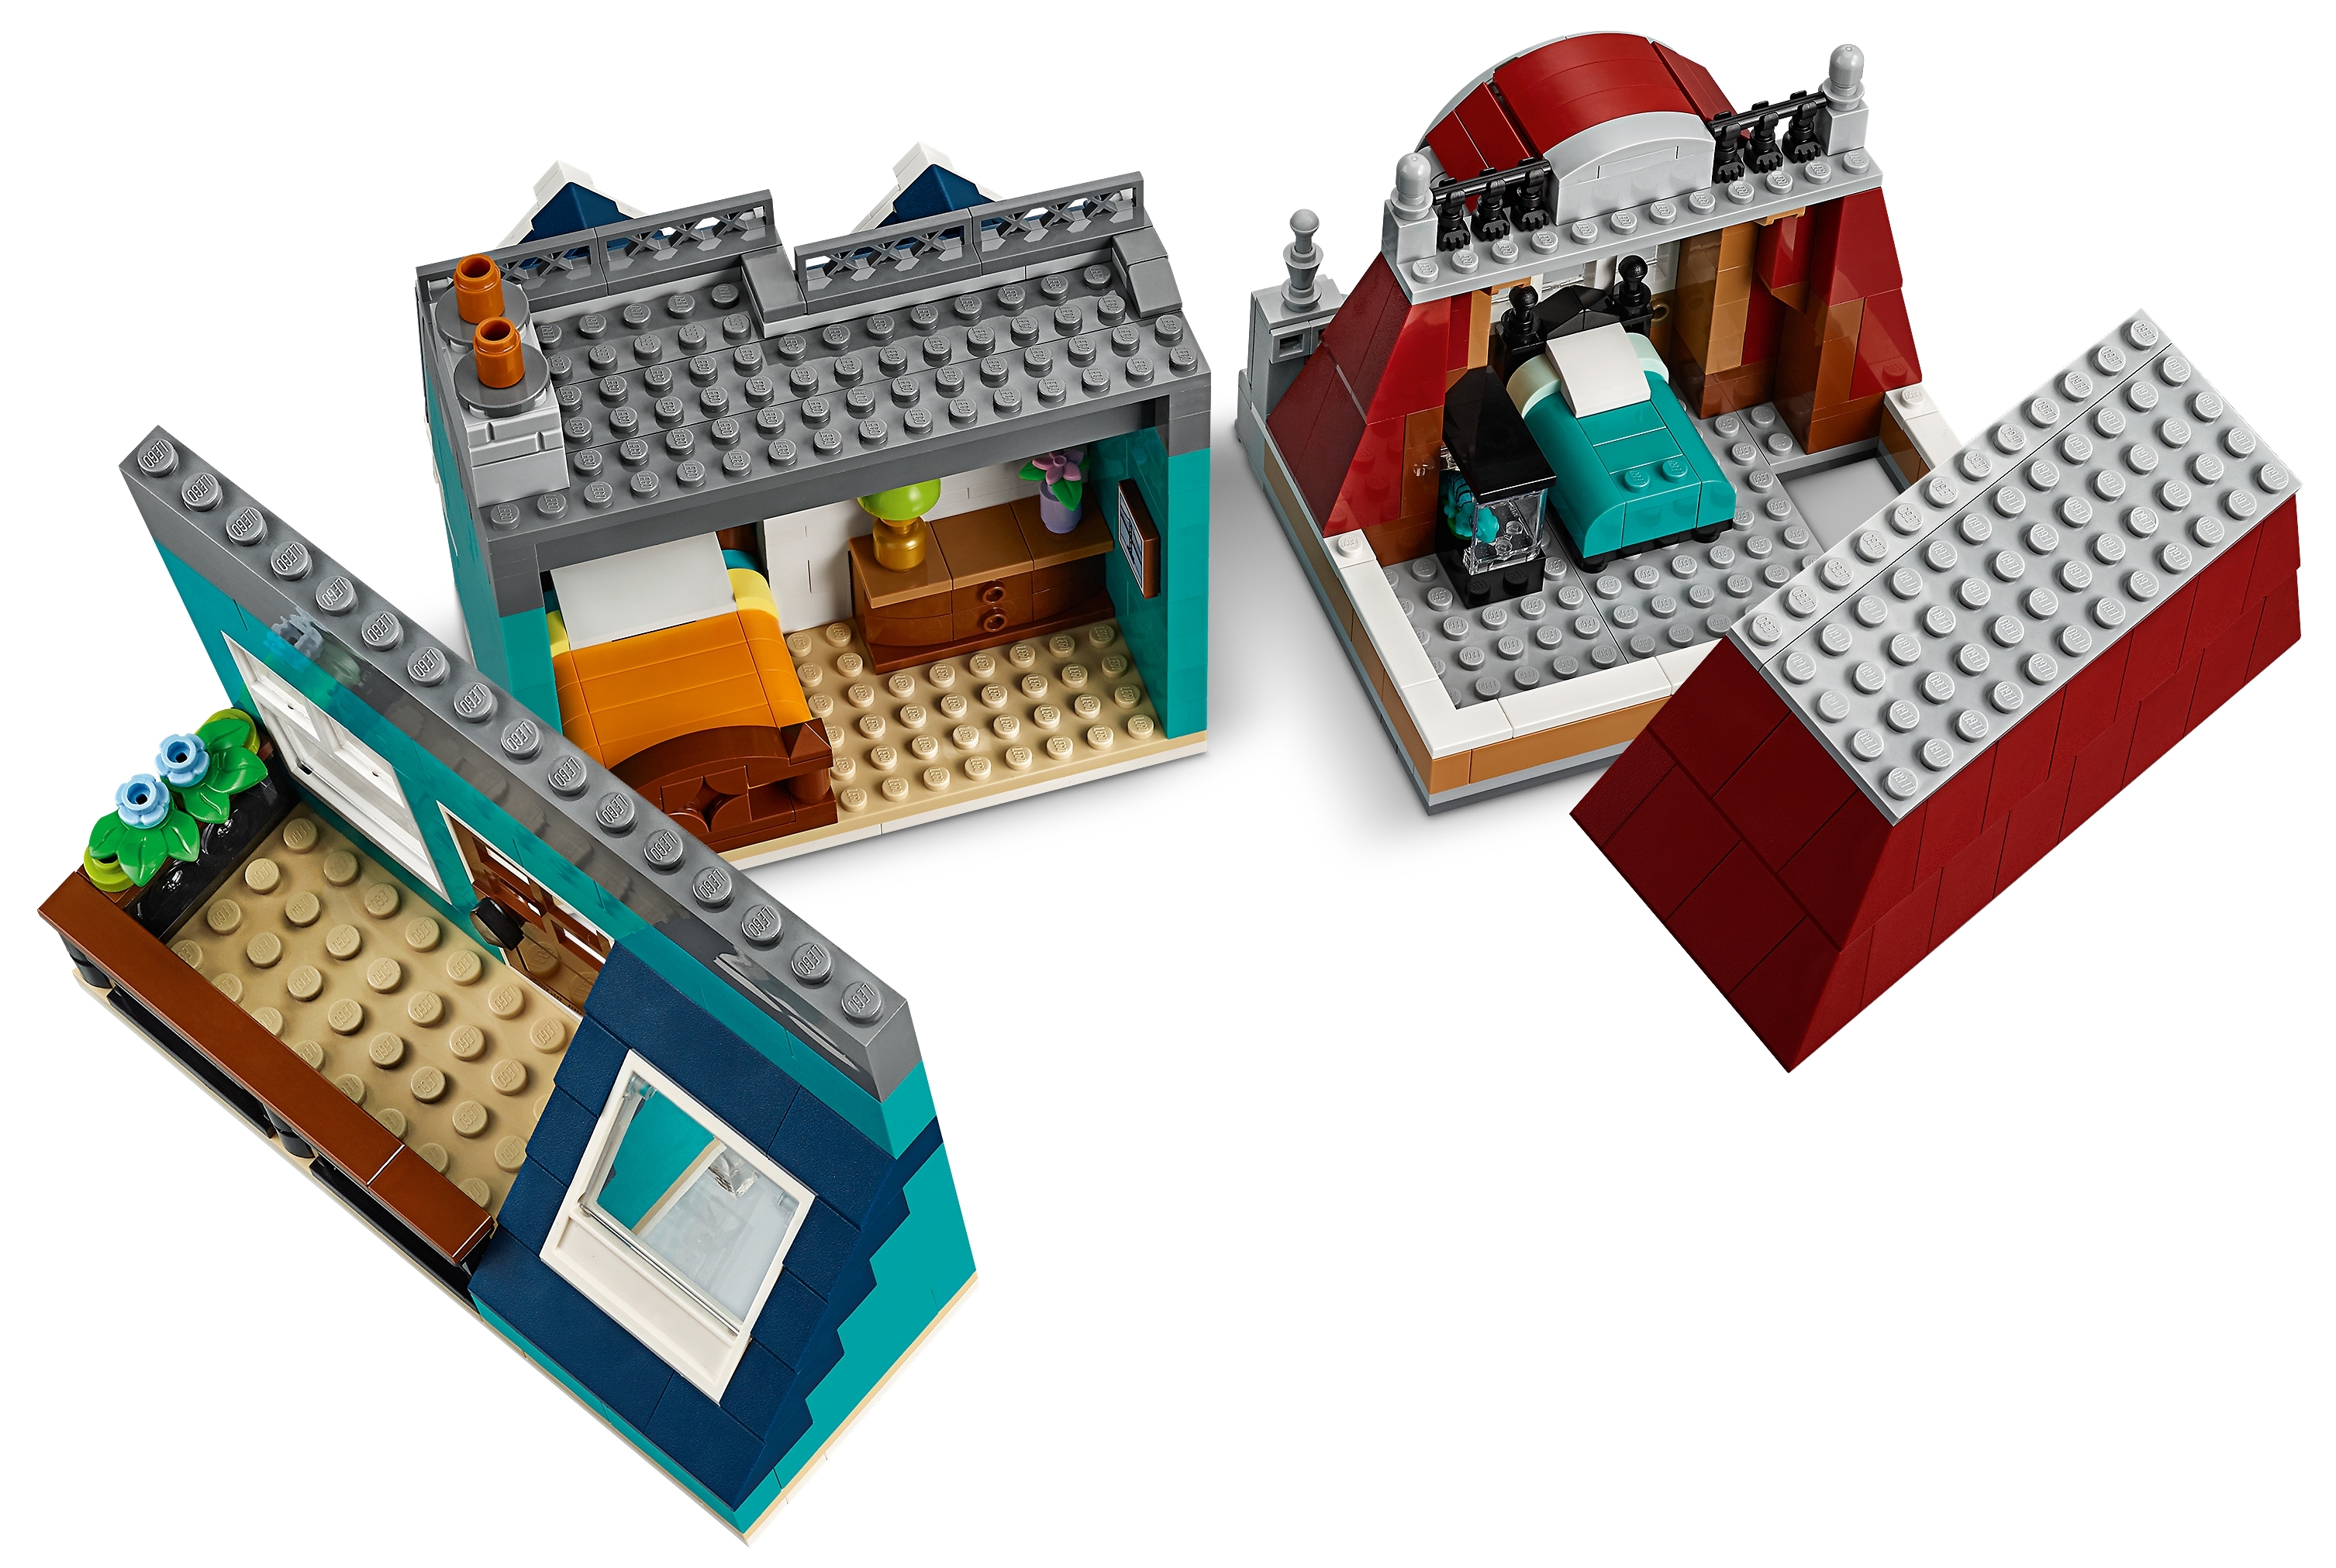 Bookshop 10270 | Creator Expert | Buy online at the Official LEGO